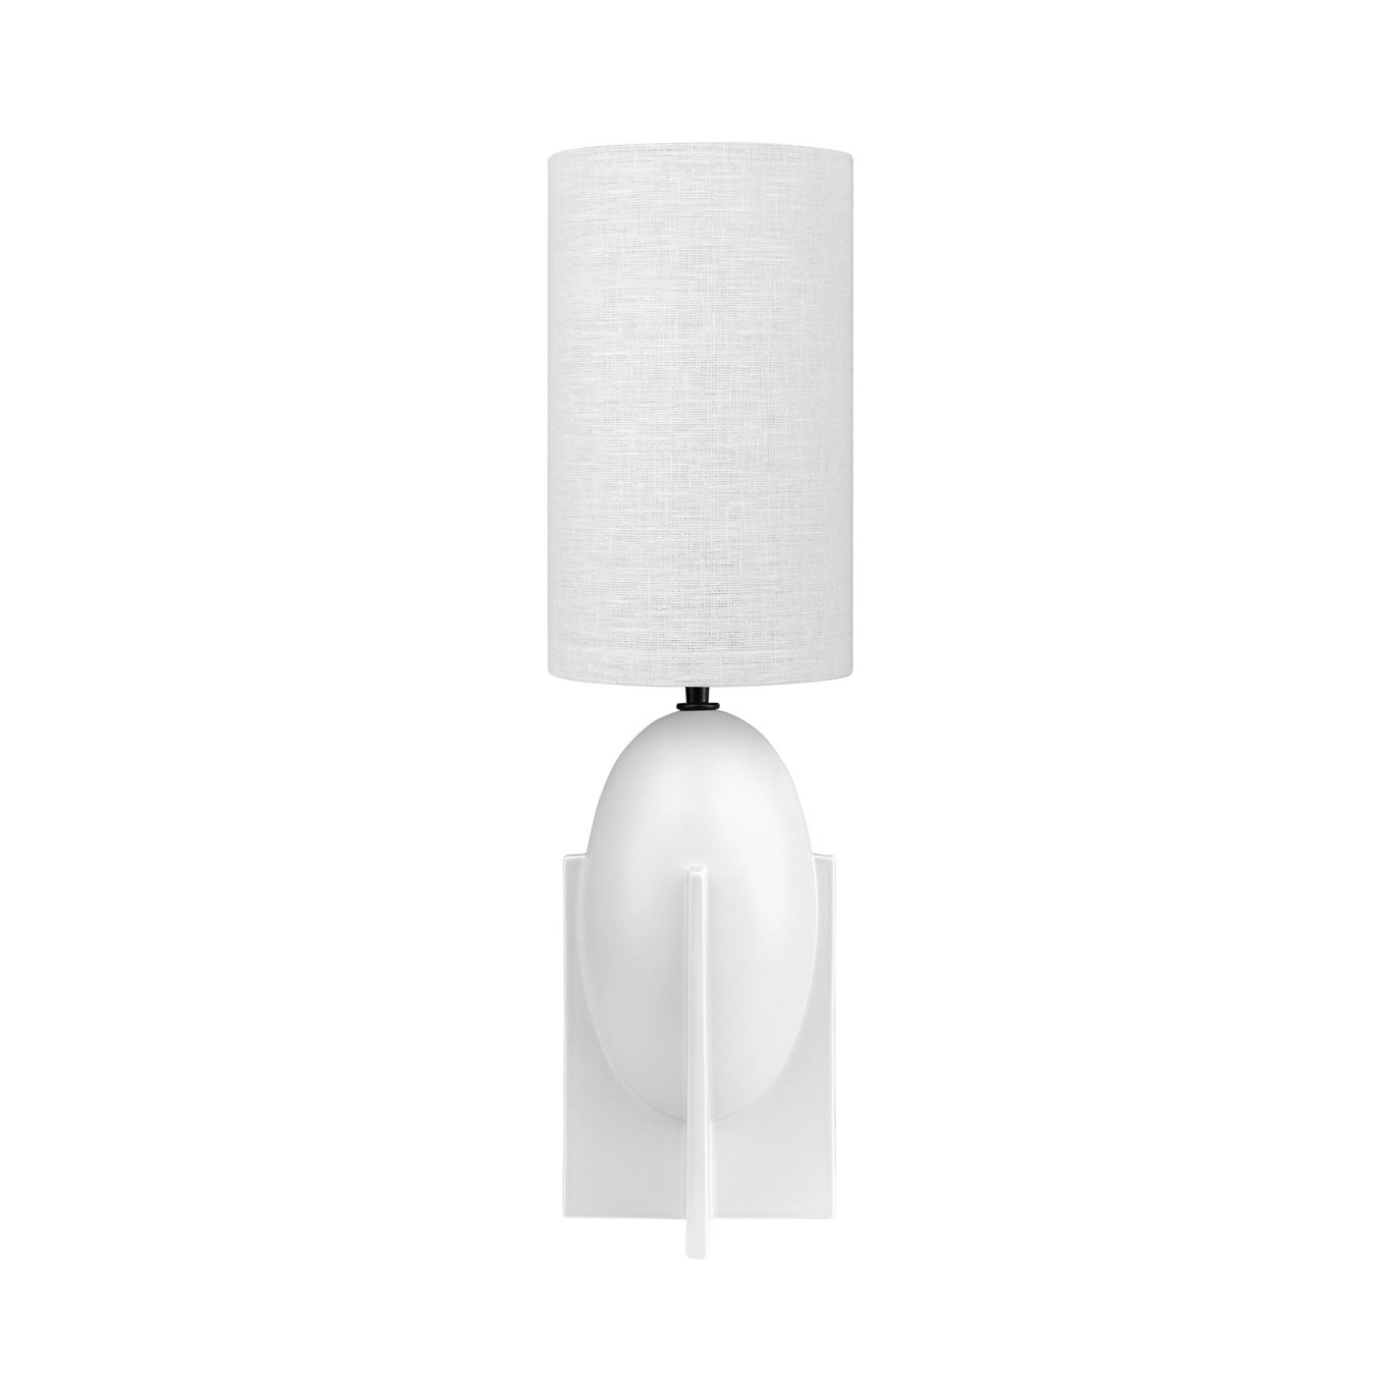 OVO 2 Earthenware Table Lamp with Shade